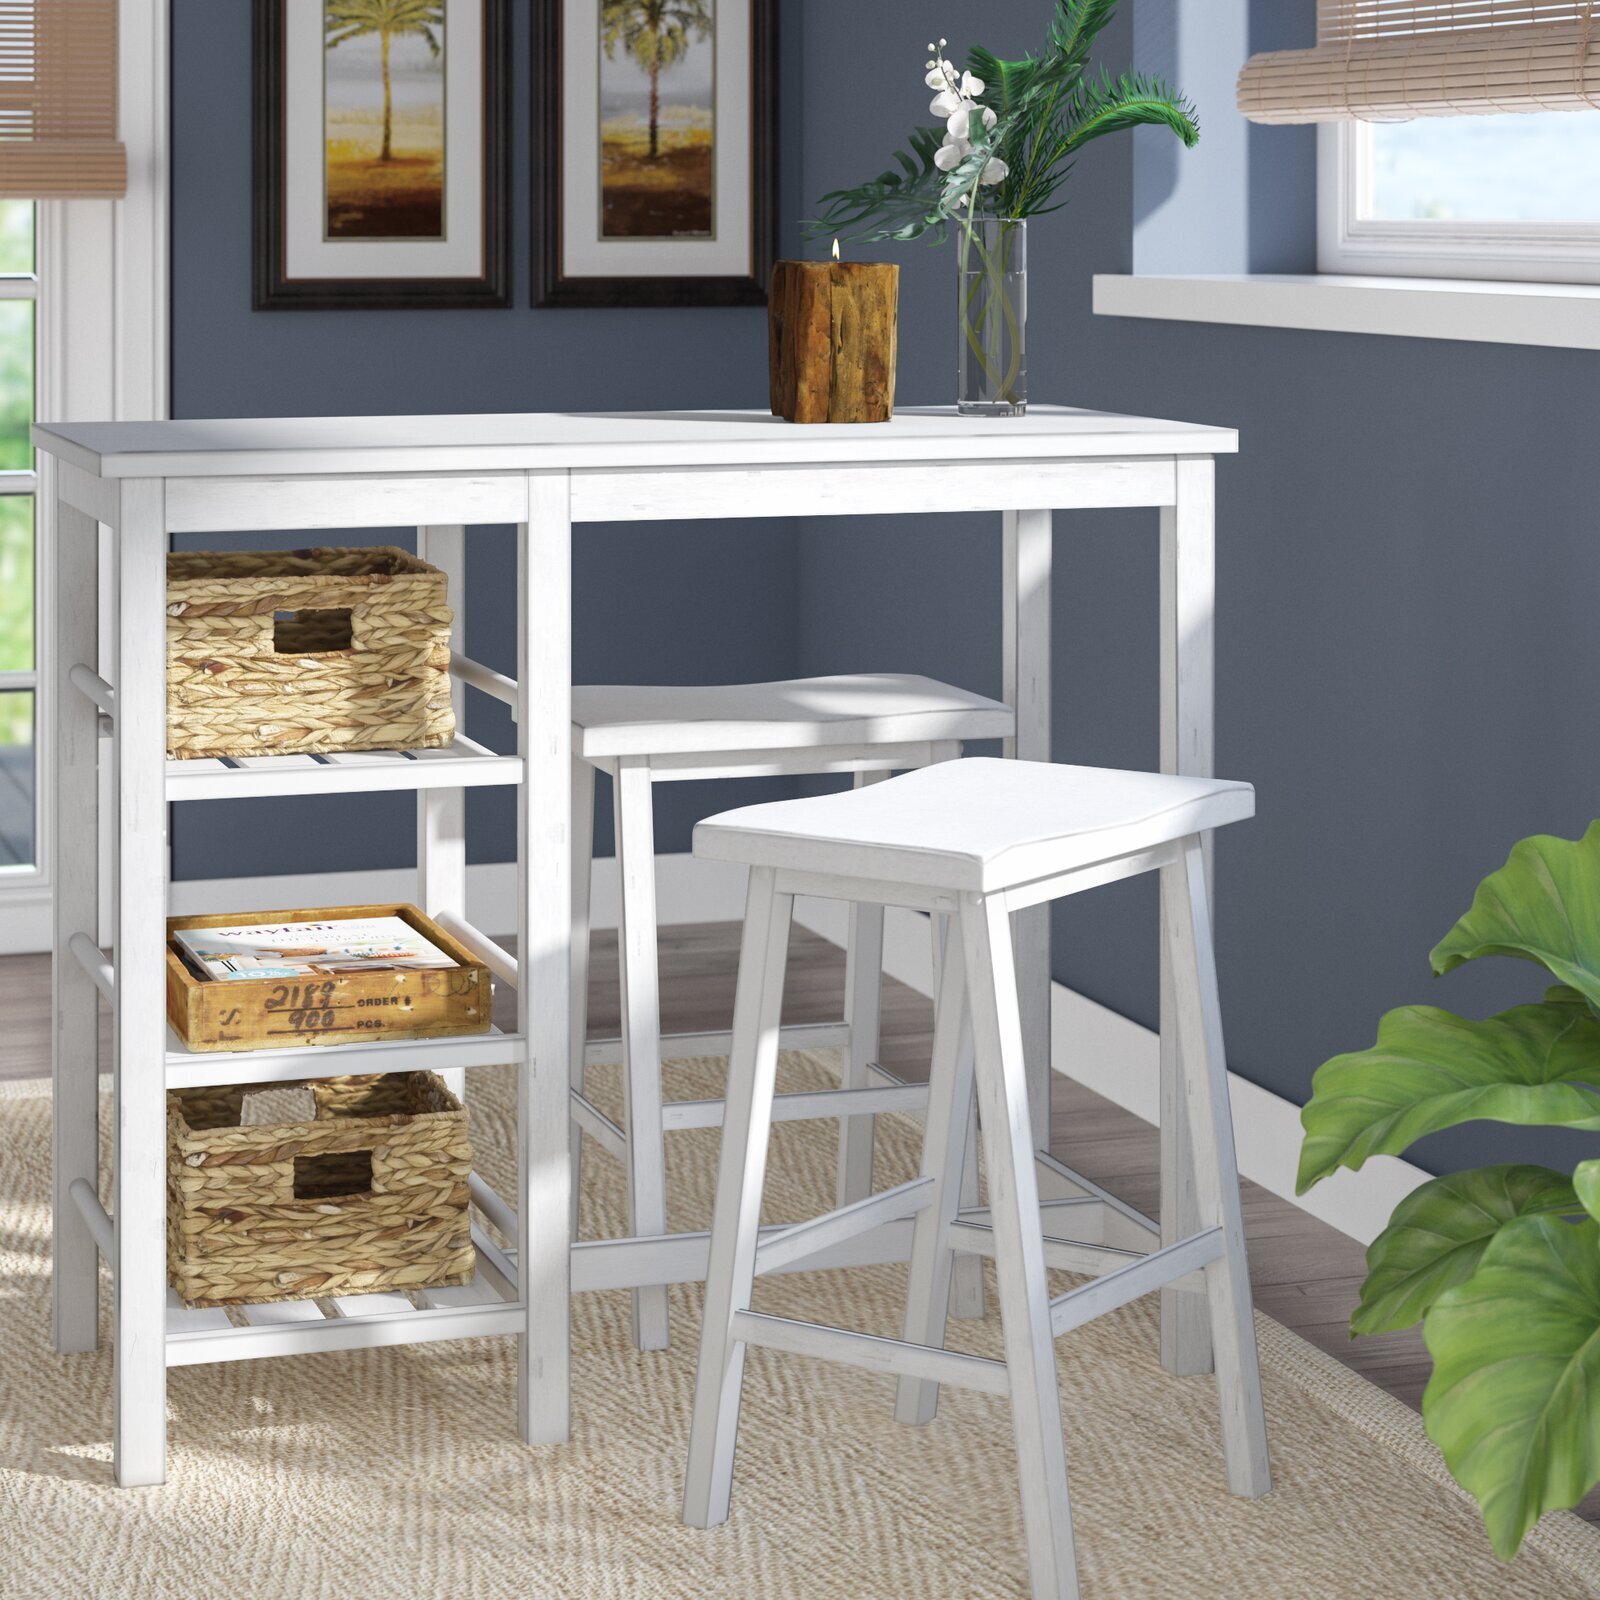 Neutral bar table with storage